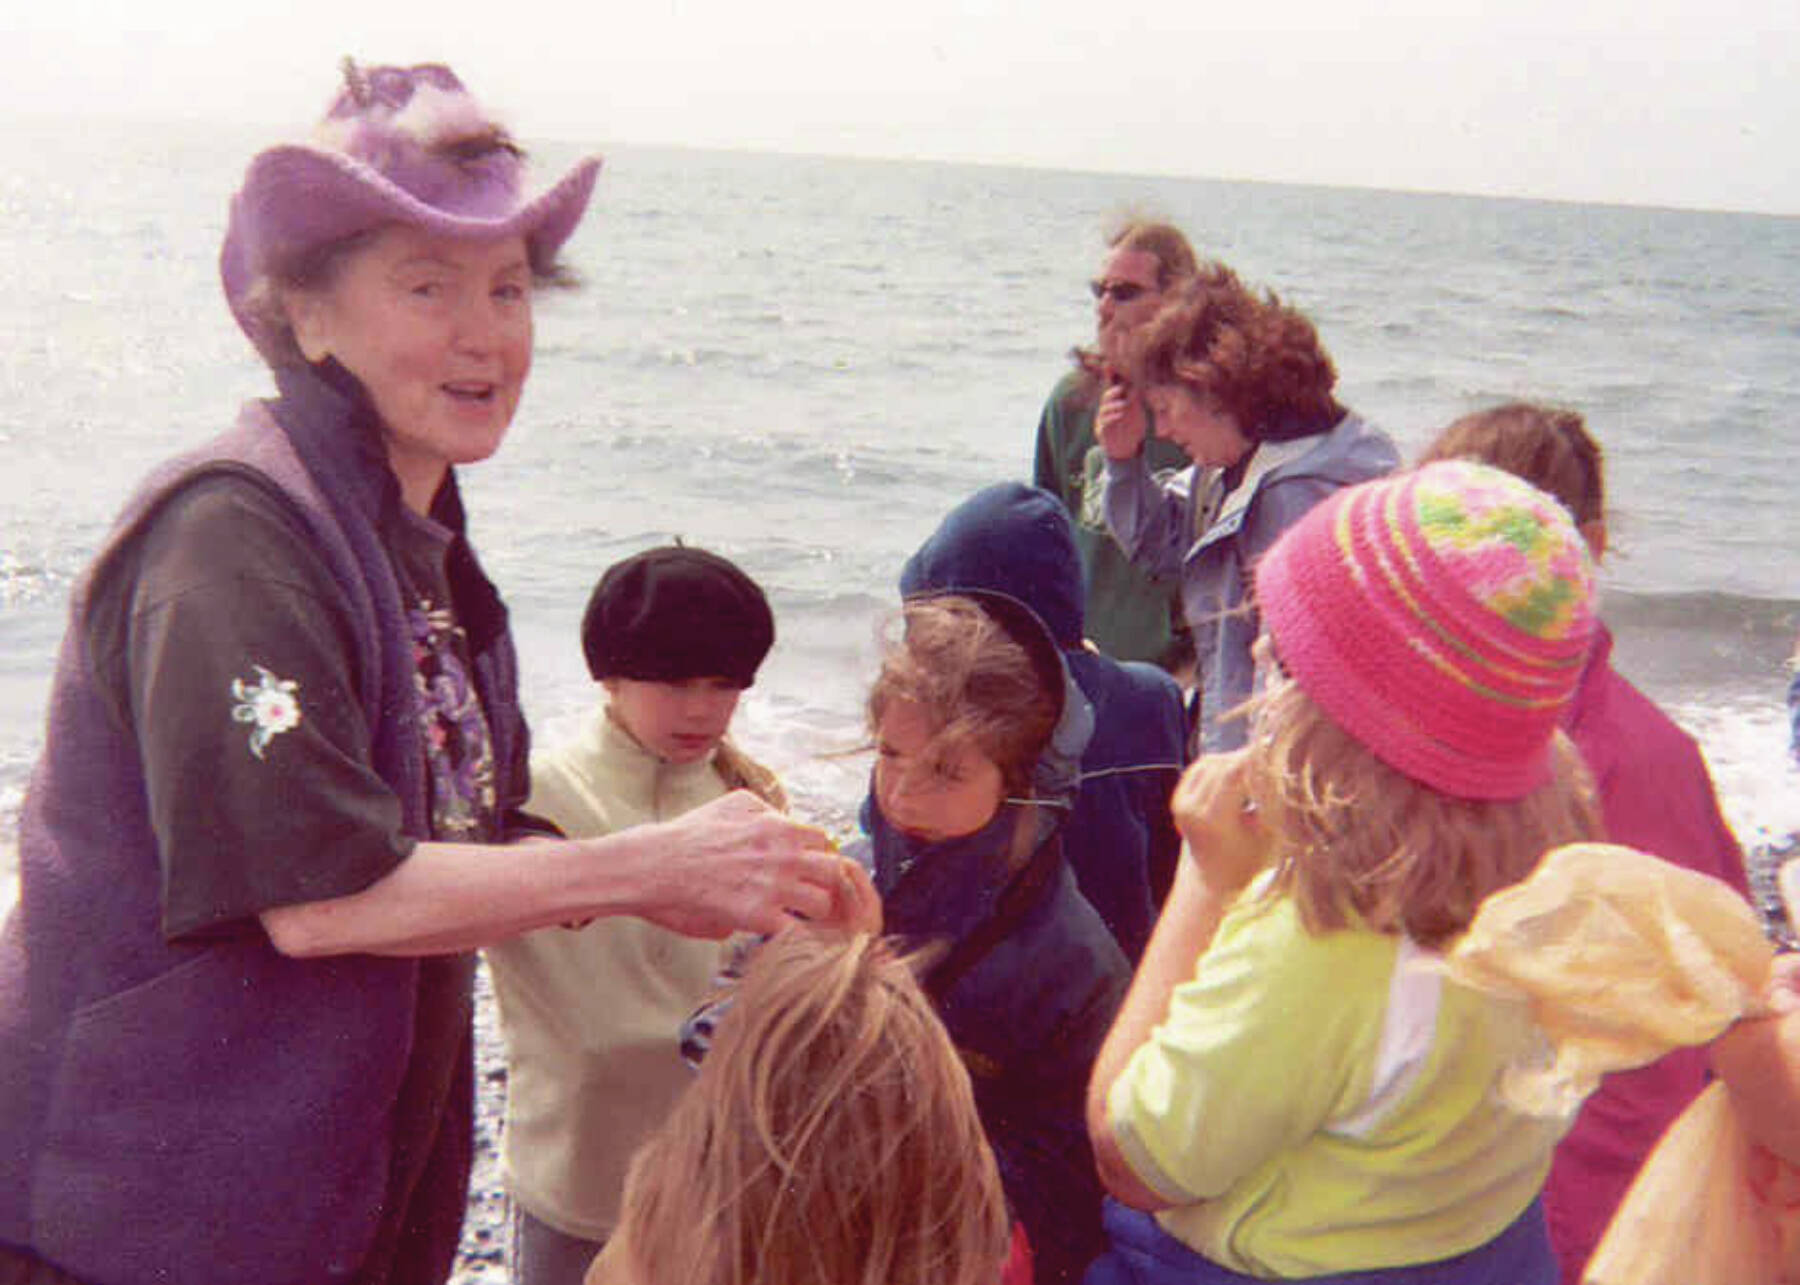 Photo contributed by the Center for Alaskan Coastal Studies
Daisy Lee Bitter with students exploring a beach in Homer. Date is unknown.